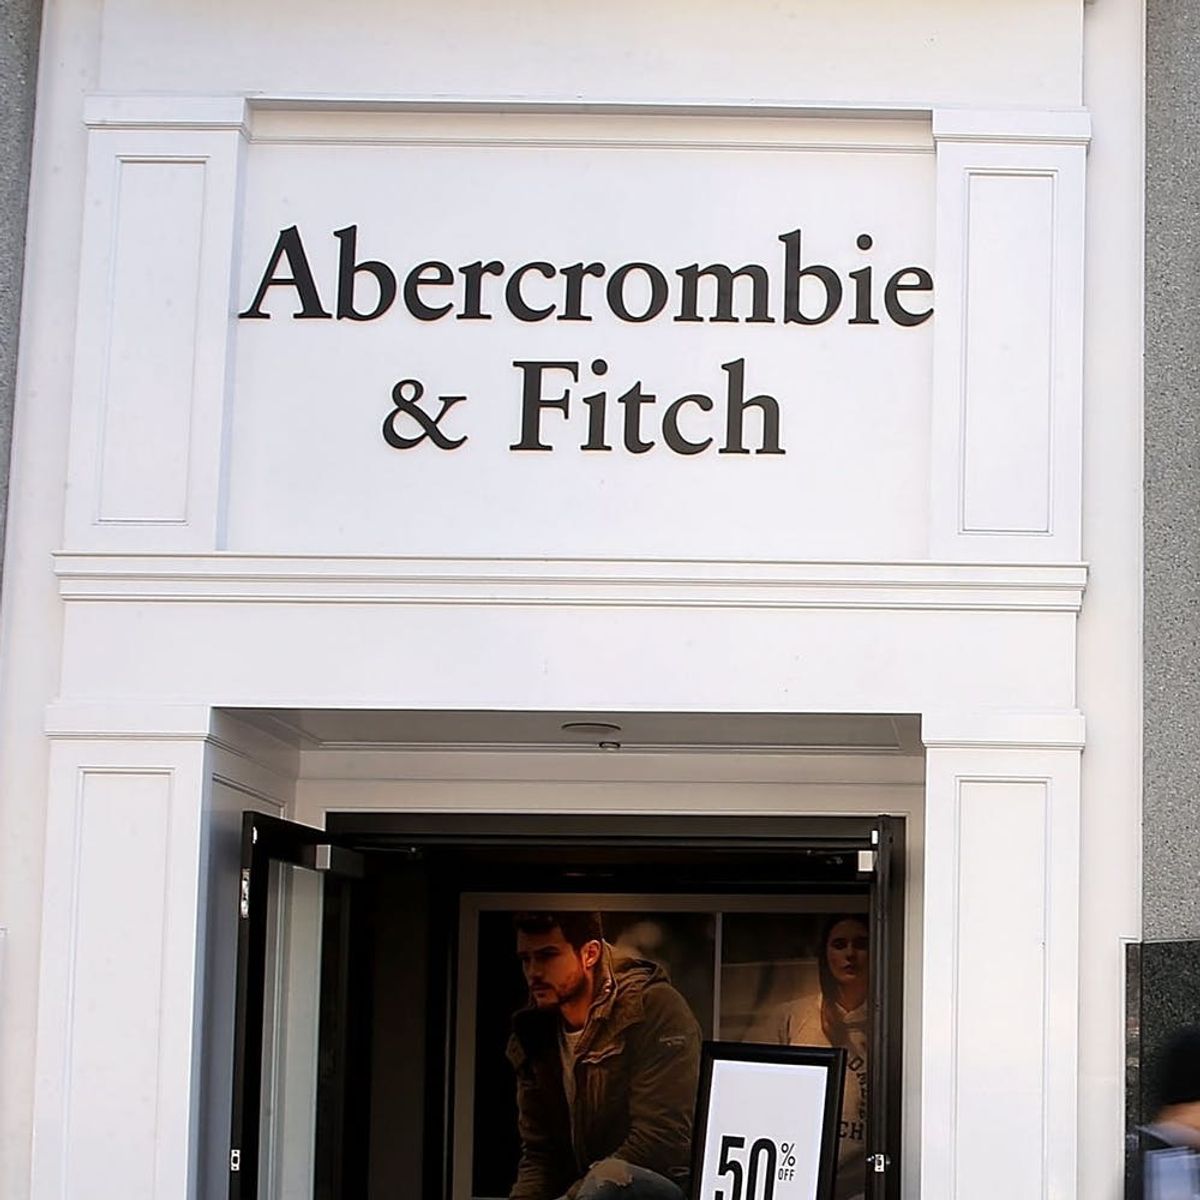 People Are NOT Here for Abercrombie & Fitch’s Pride Tweet